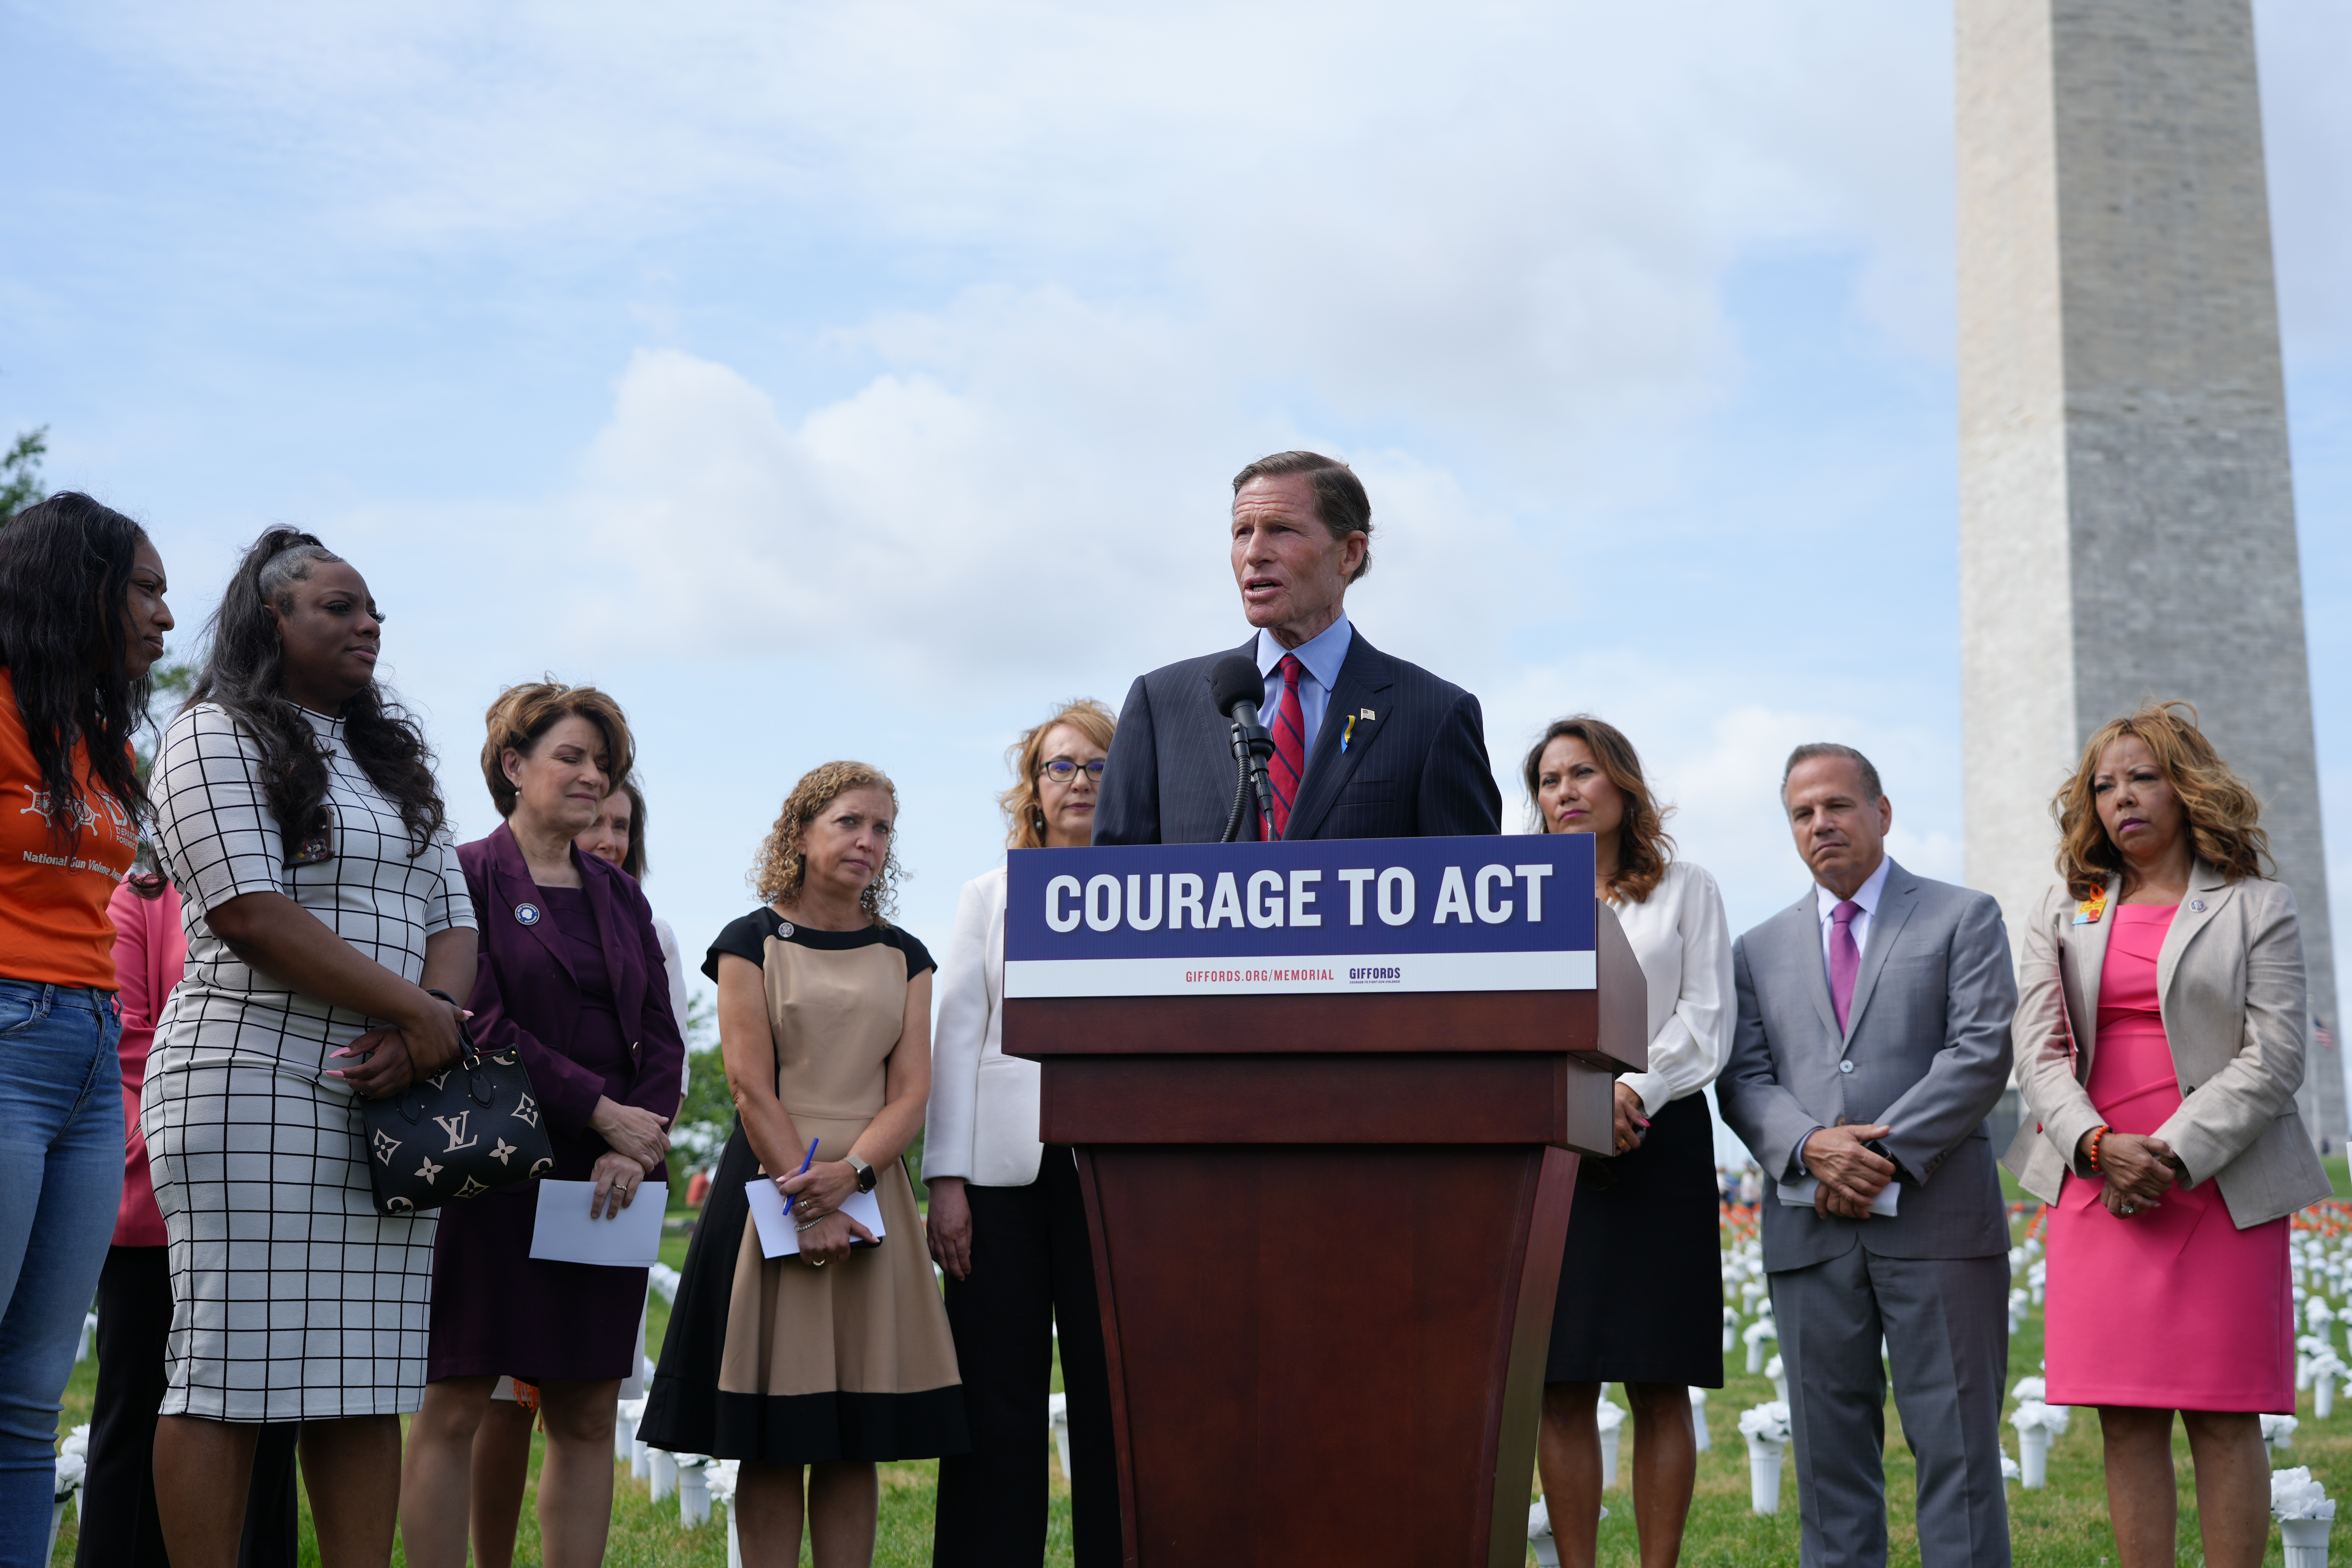 U.S. Senator Richard Blumenthal (D-CT) rallied with Students Demand Action yesterday afternoon and today joined Gabby Giffords at the National Gun Violence Memorial to urge Congress to address America’s gun violence epidemic. 